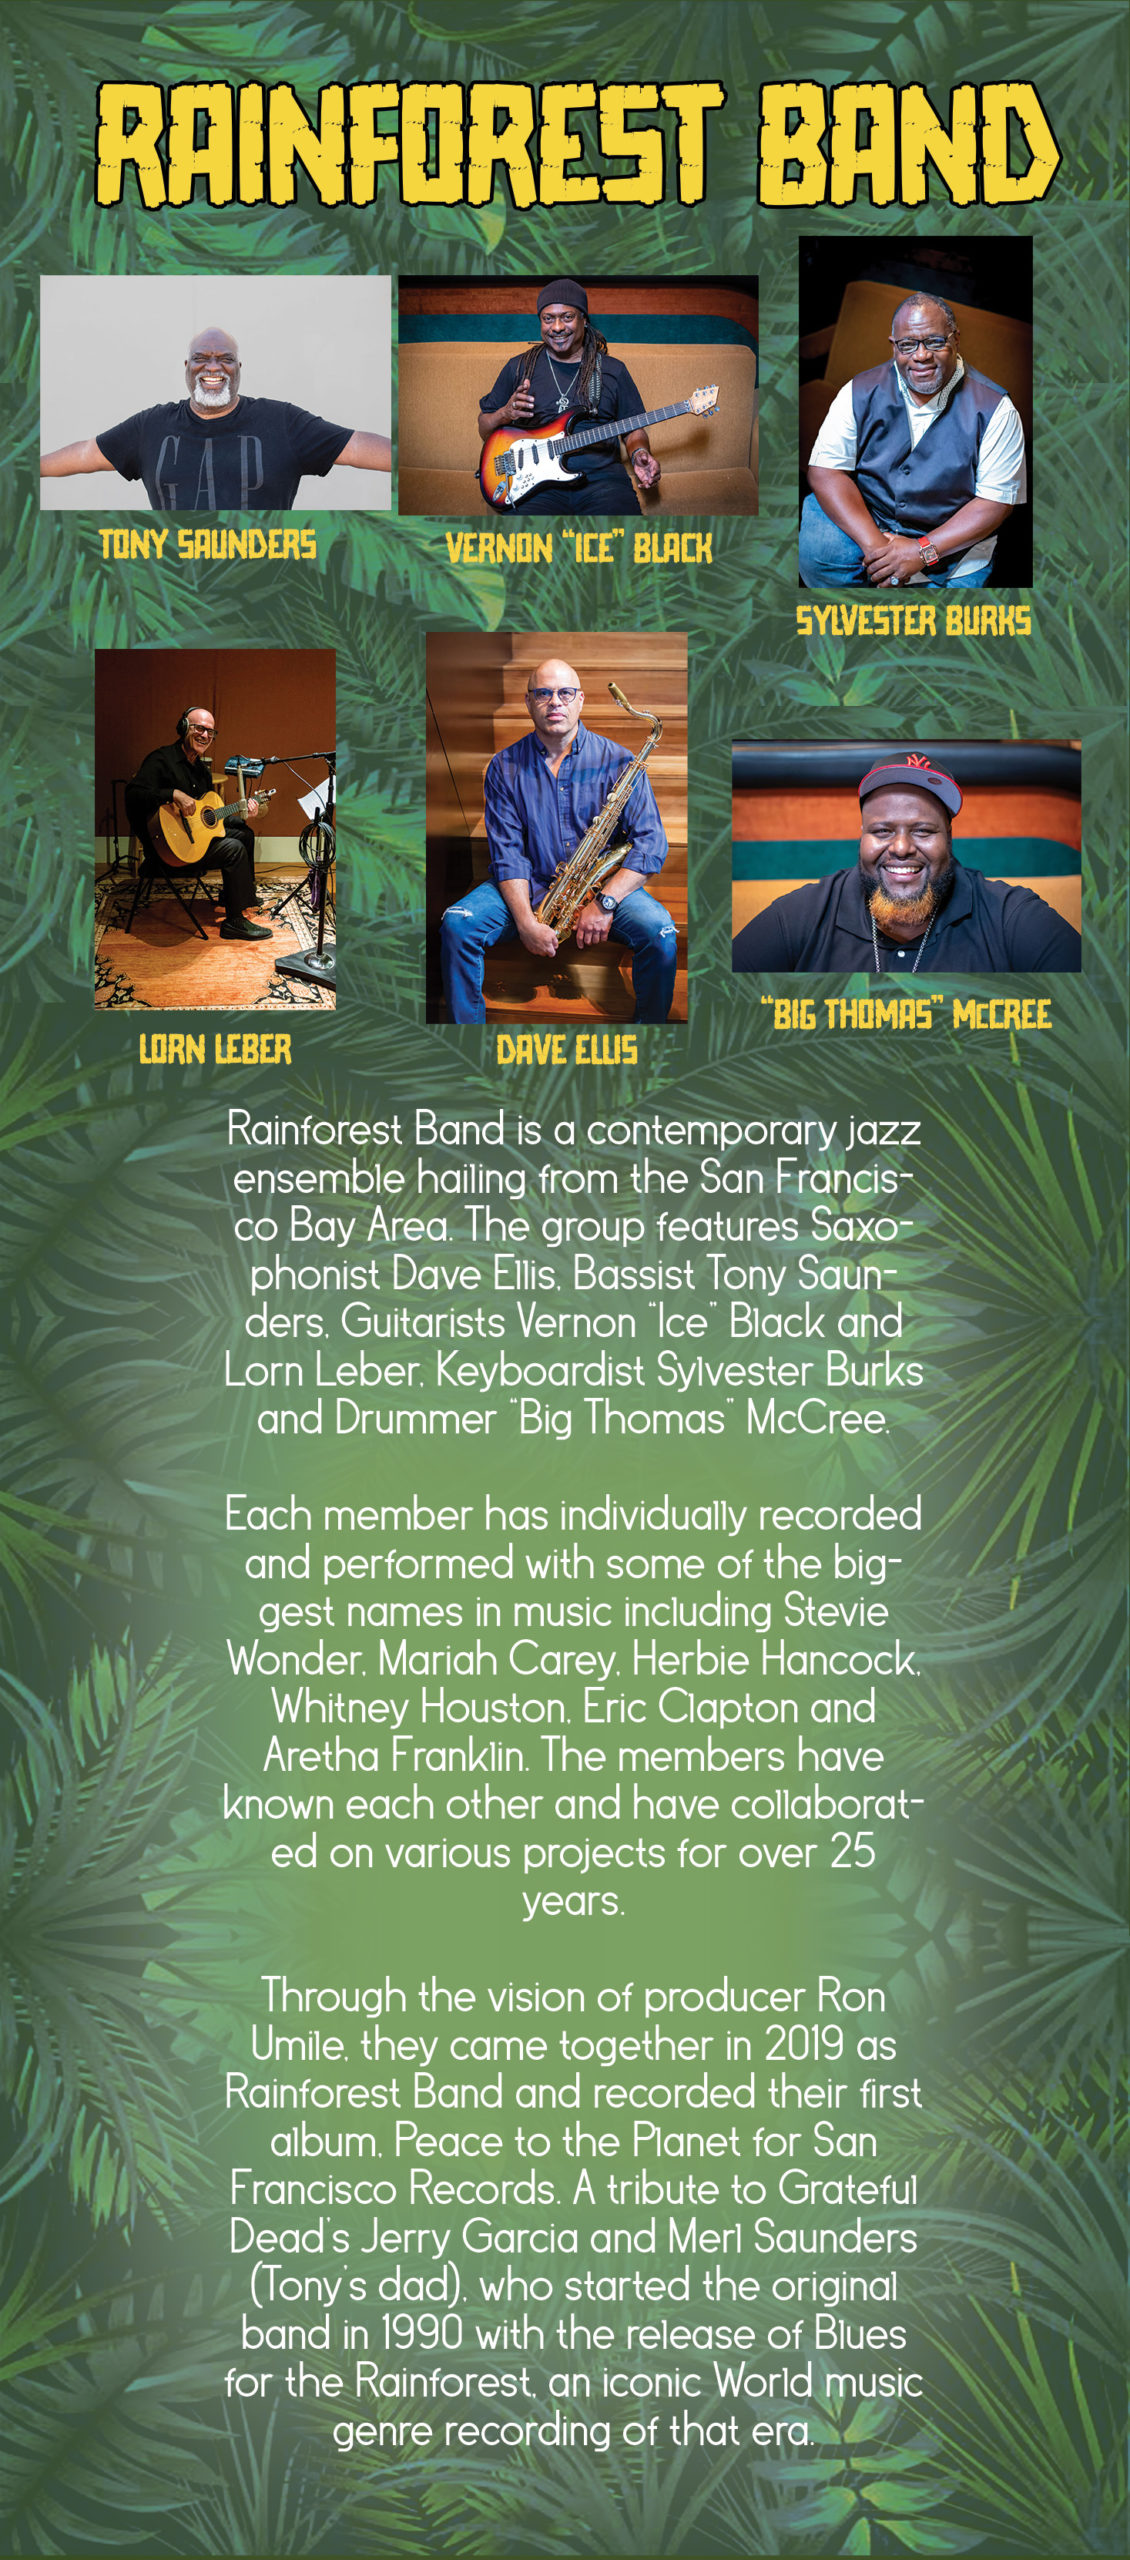 Rainforest Band Website Home Page